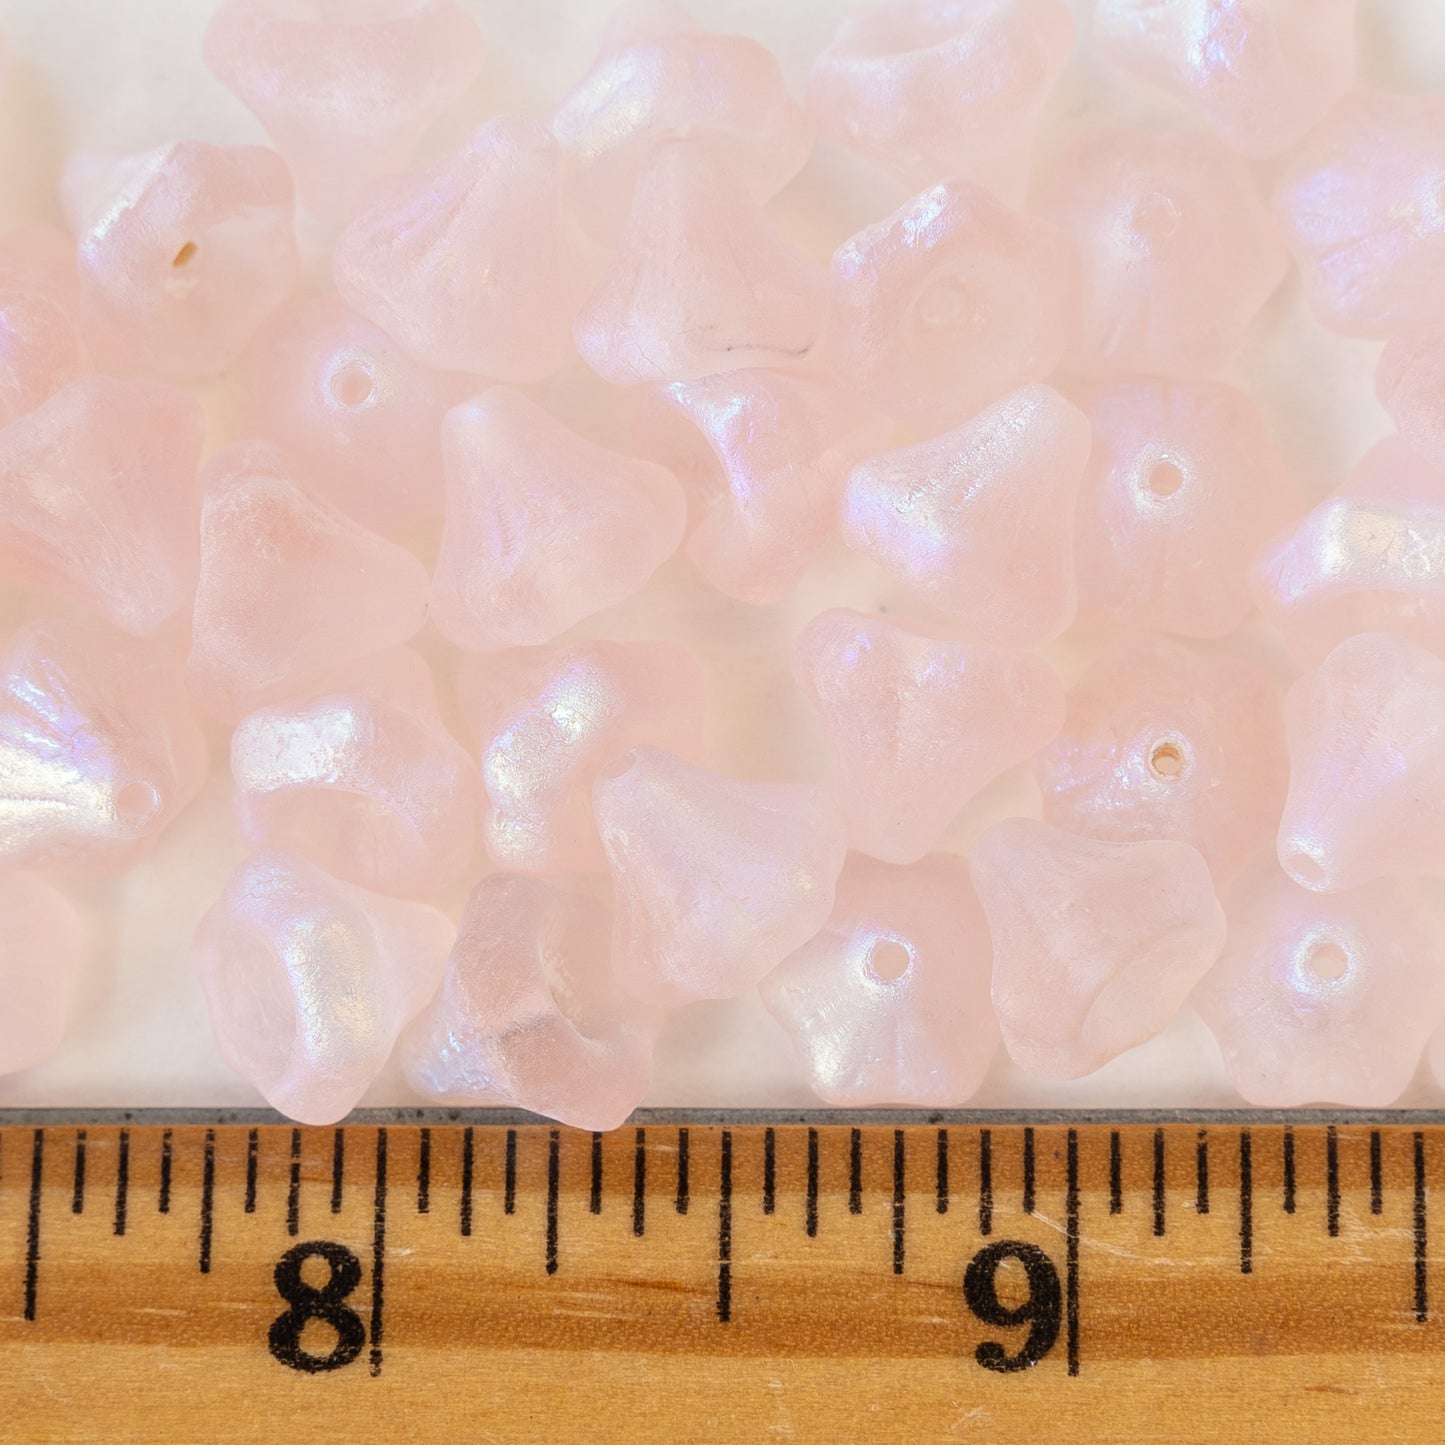 Load image into Gallery viewer, 9mm Bell Flower Beads - Pink Matte AB - 10 beads
